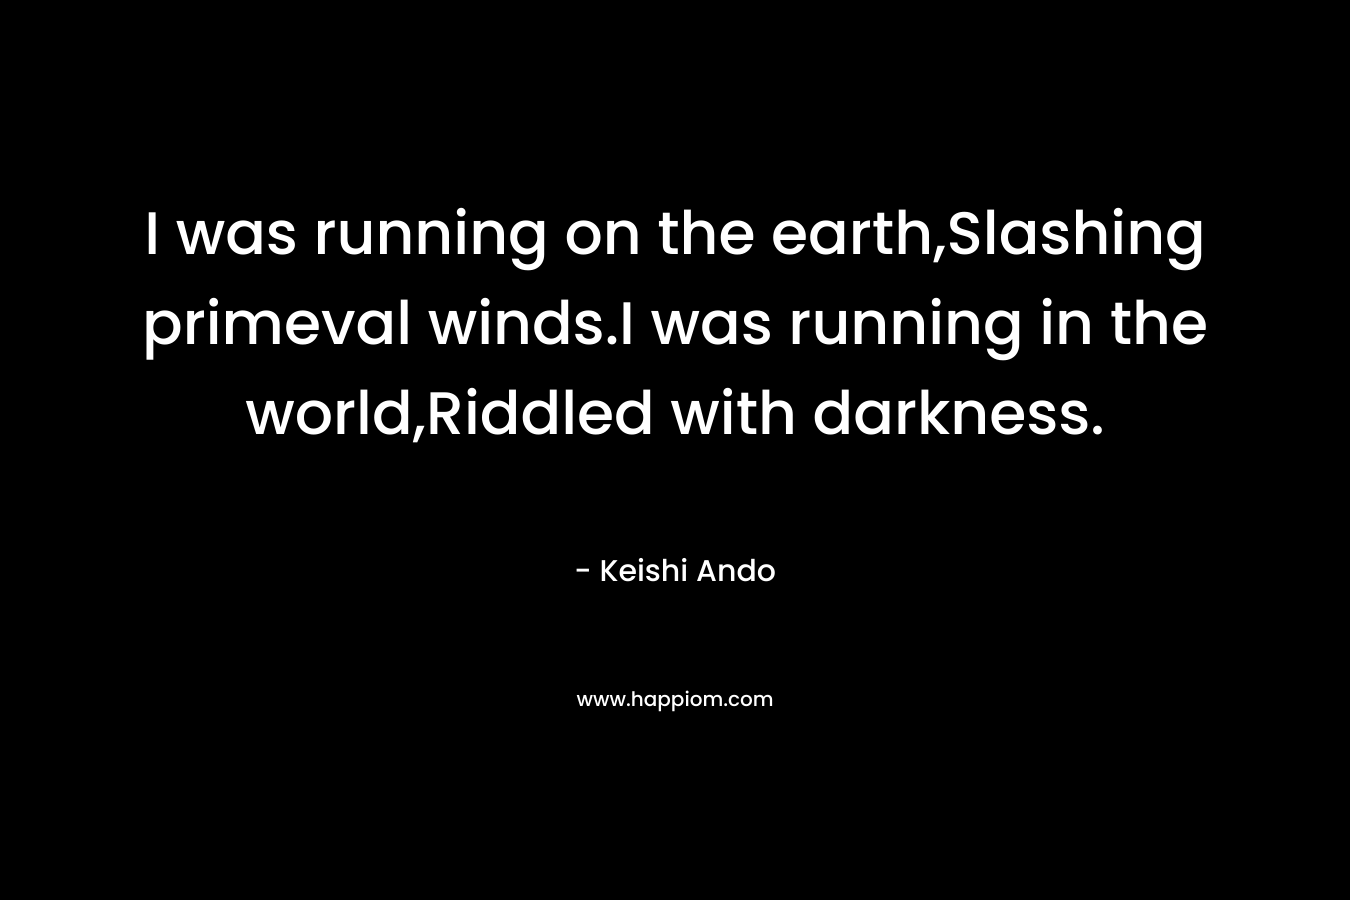 I was running on the earth,Slashing primeval winds.I was running in the world,Riddled with darkness.